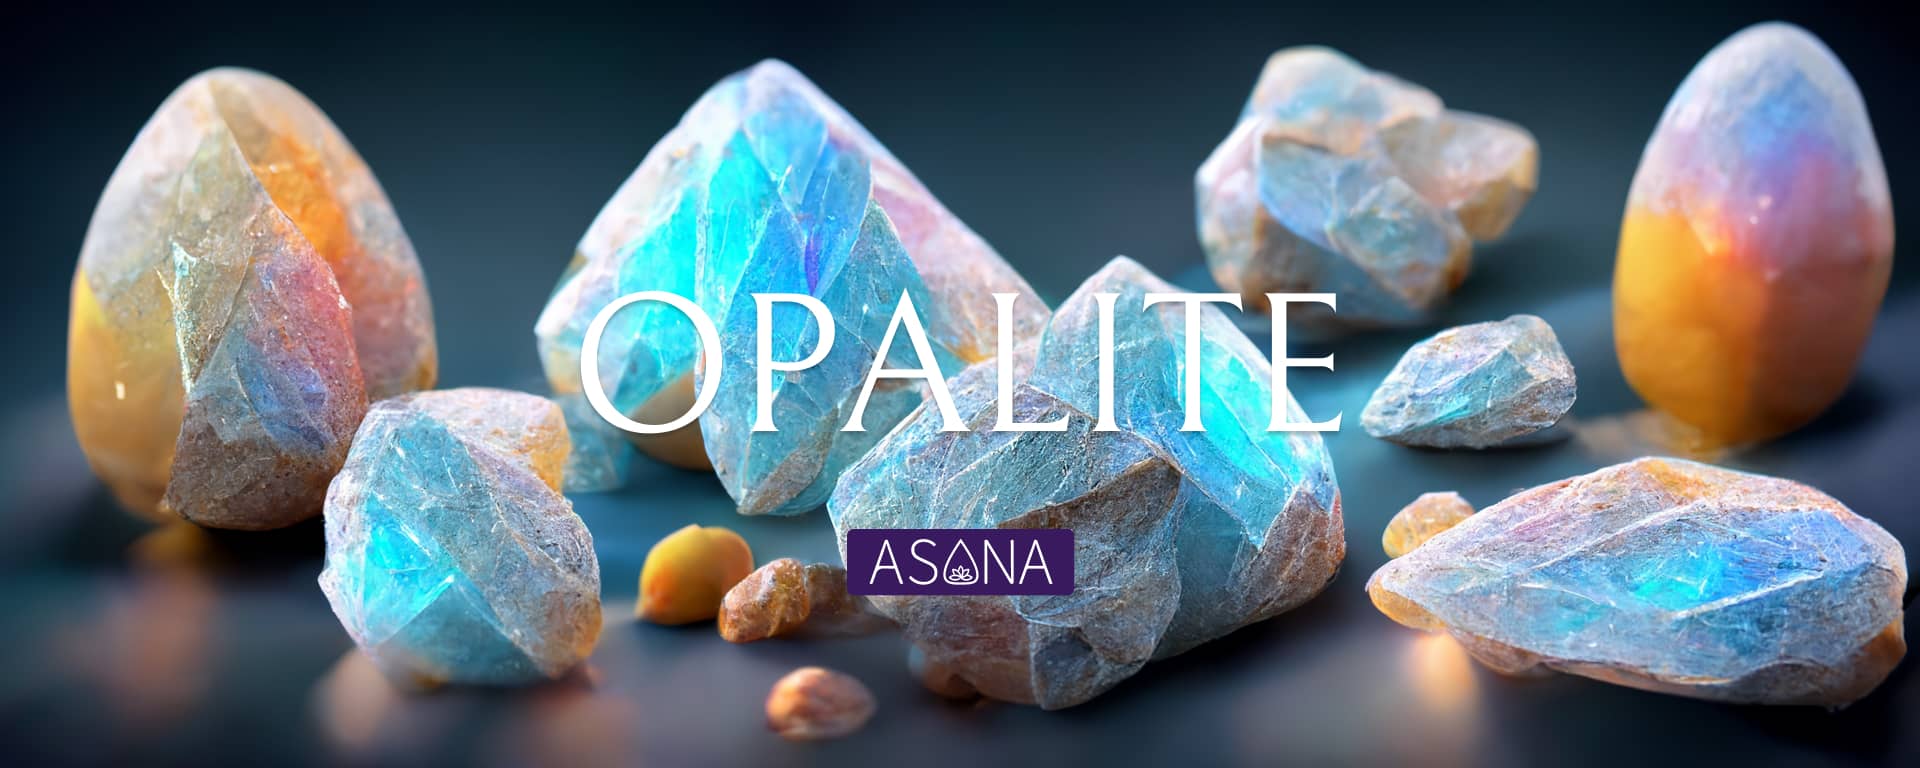 How To Use Opalite In Dreams